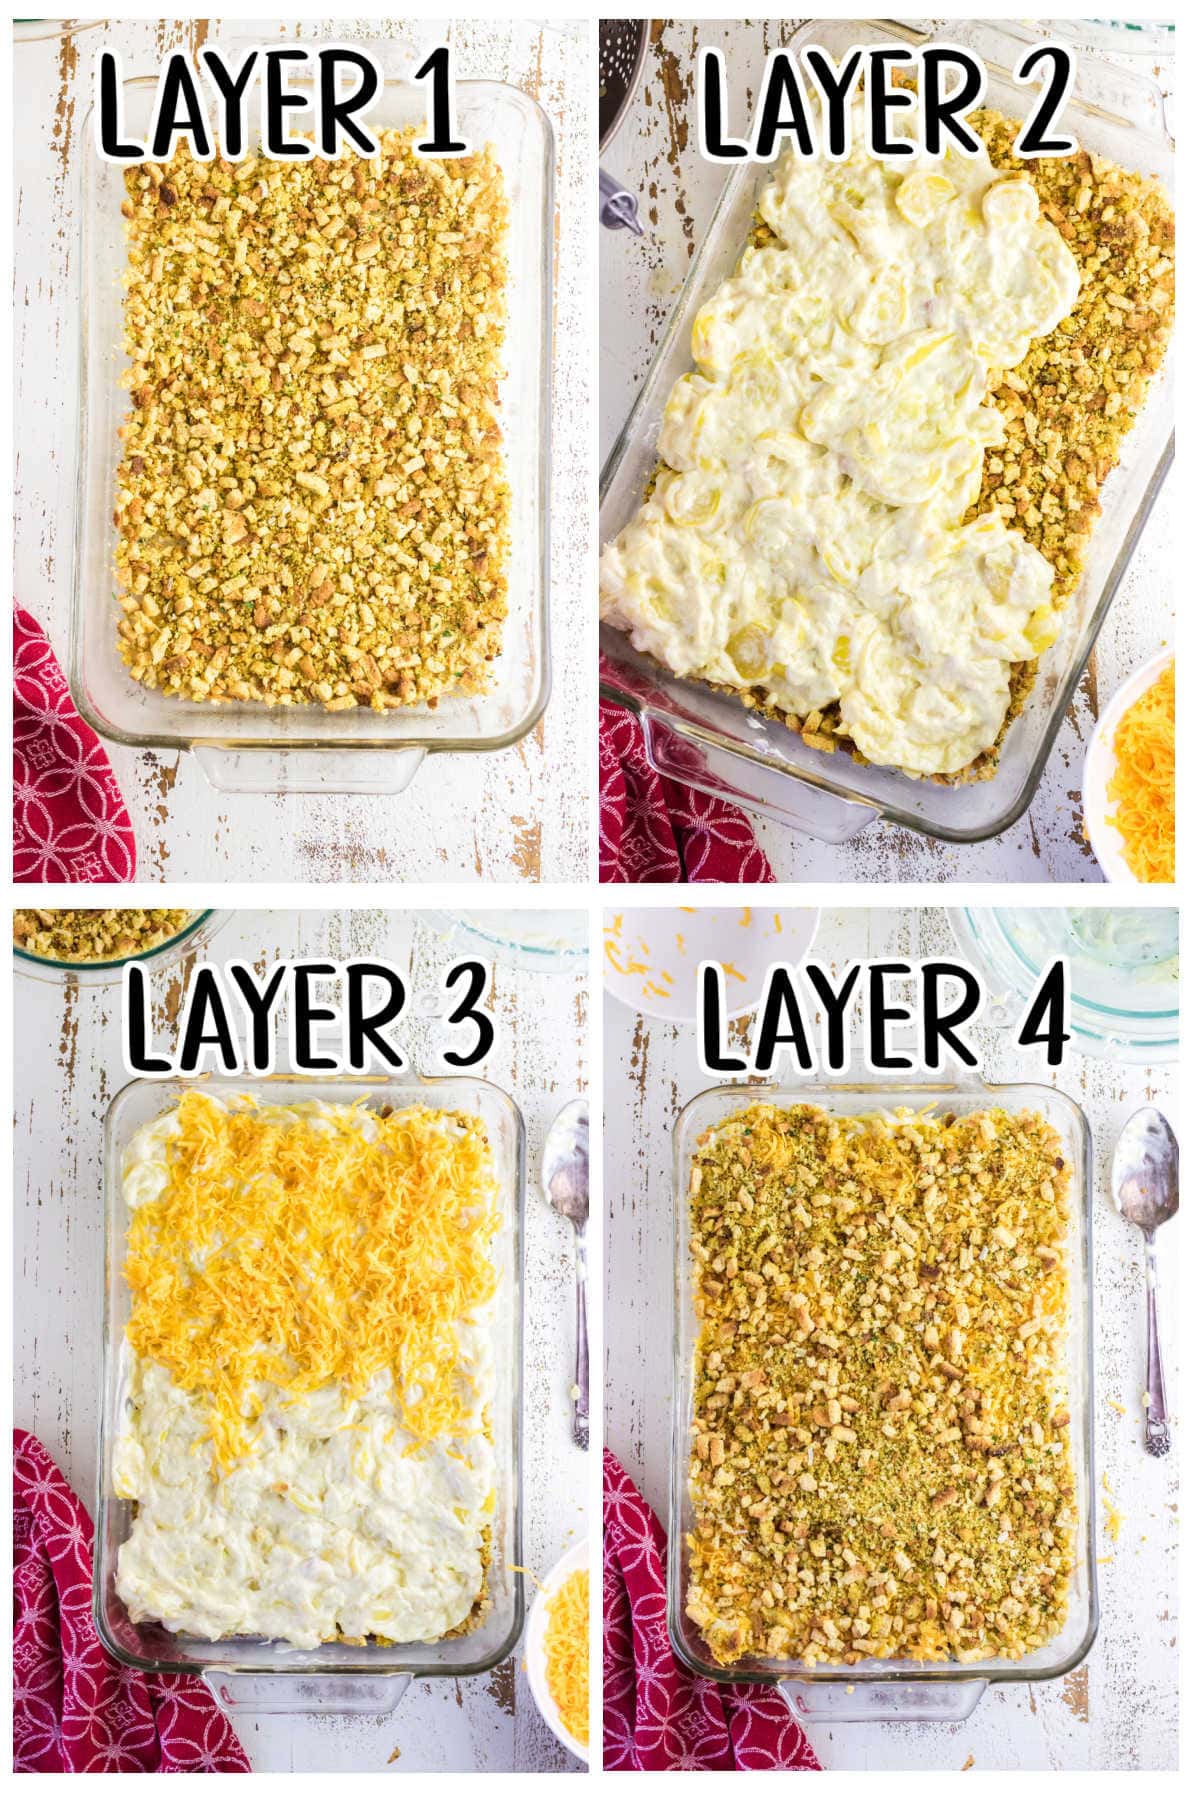 Step by step images showing how to make summer squash casserole.